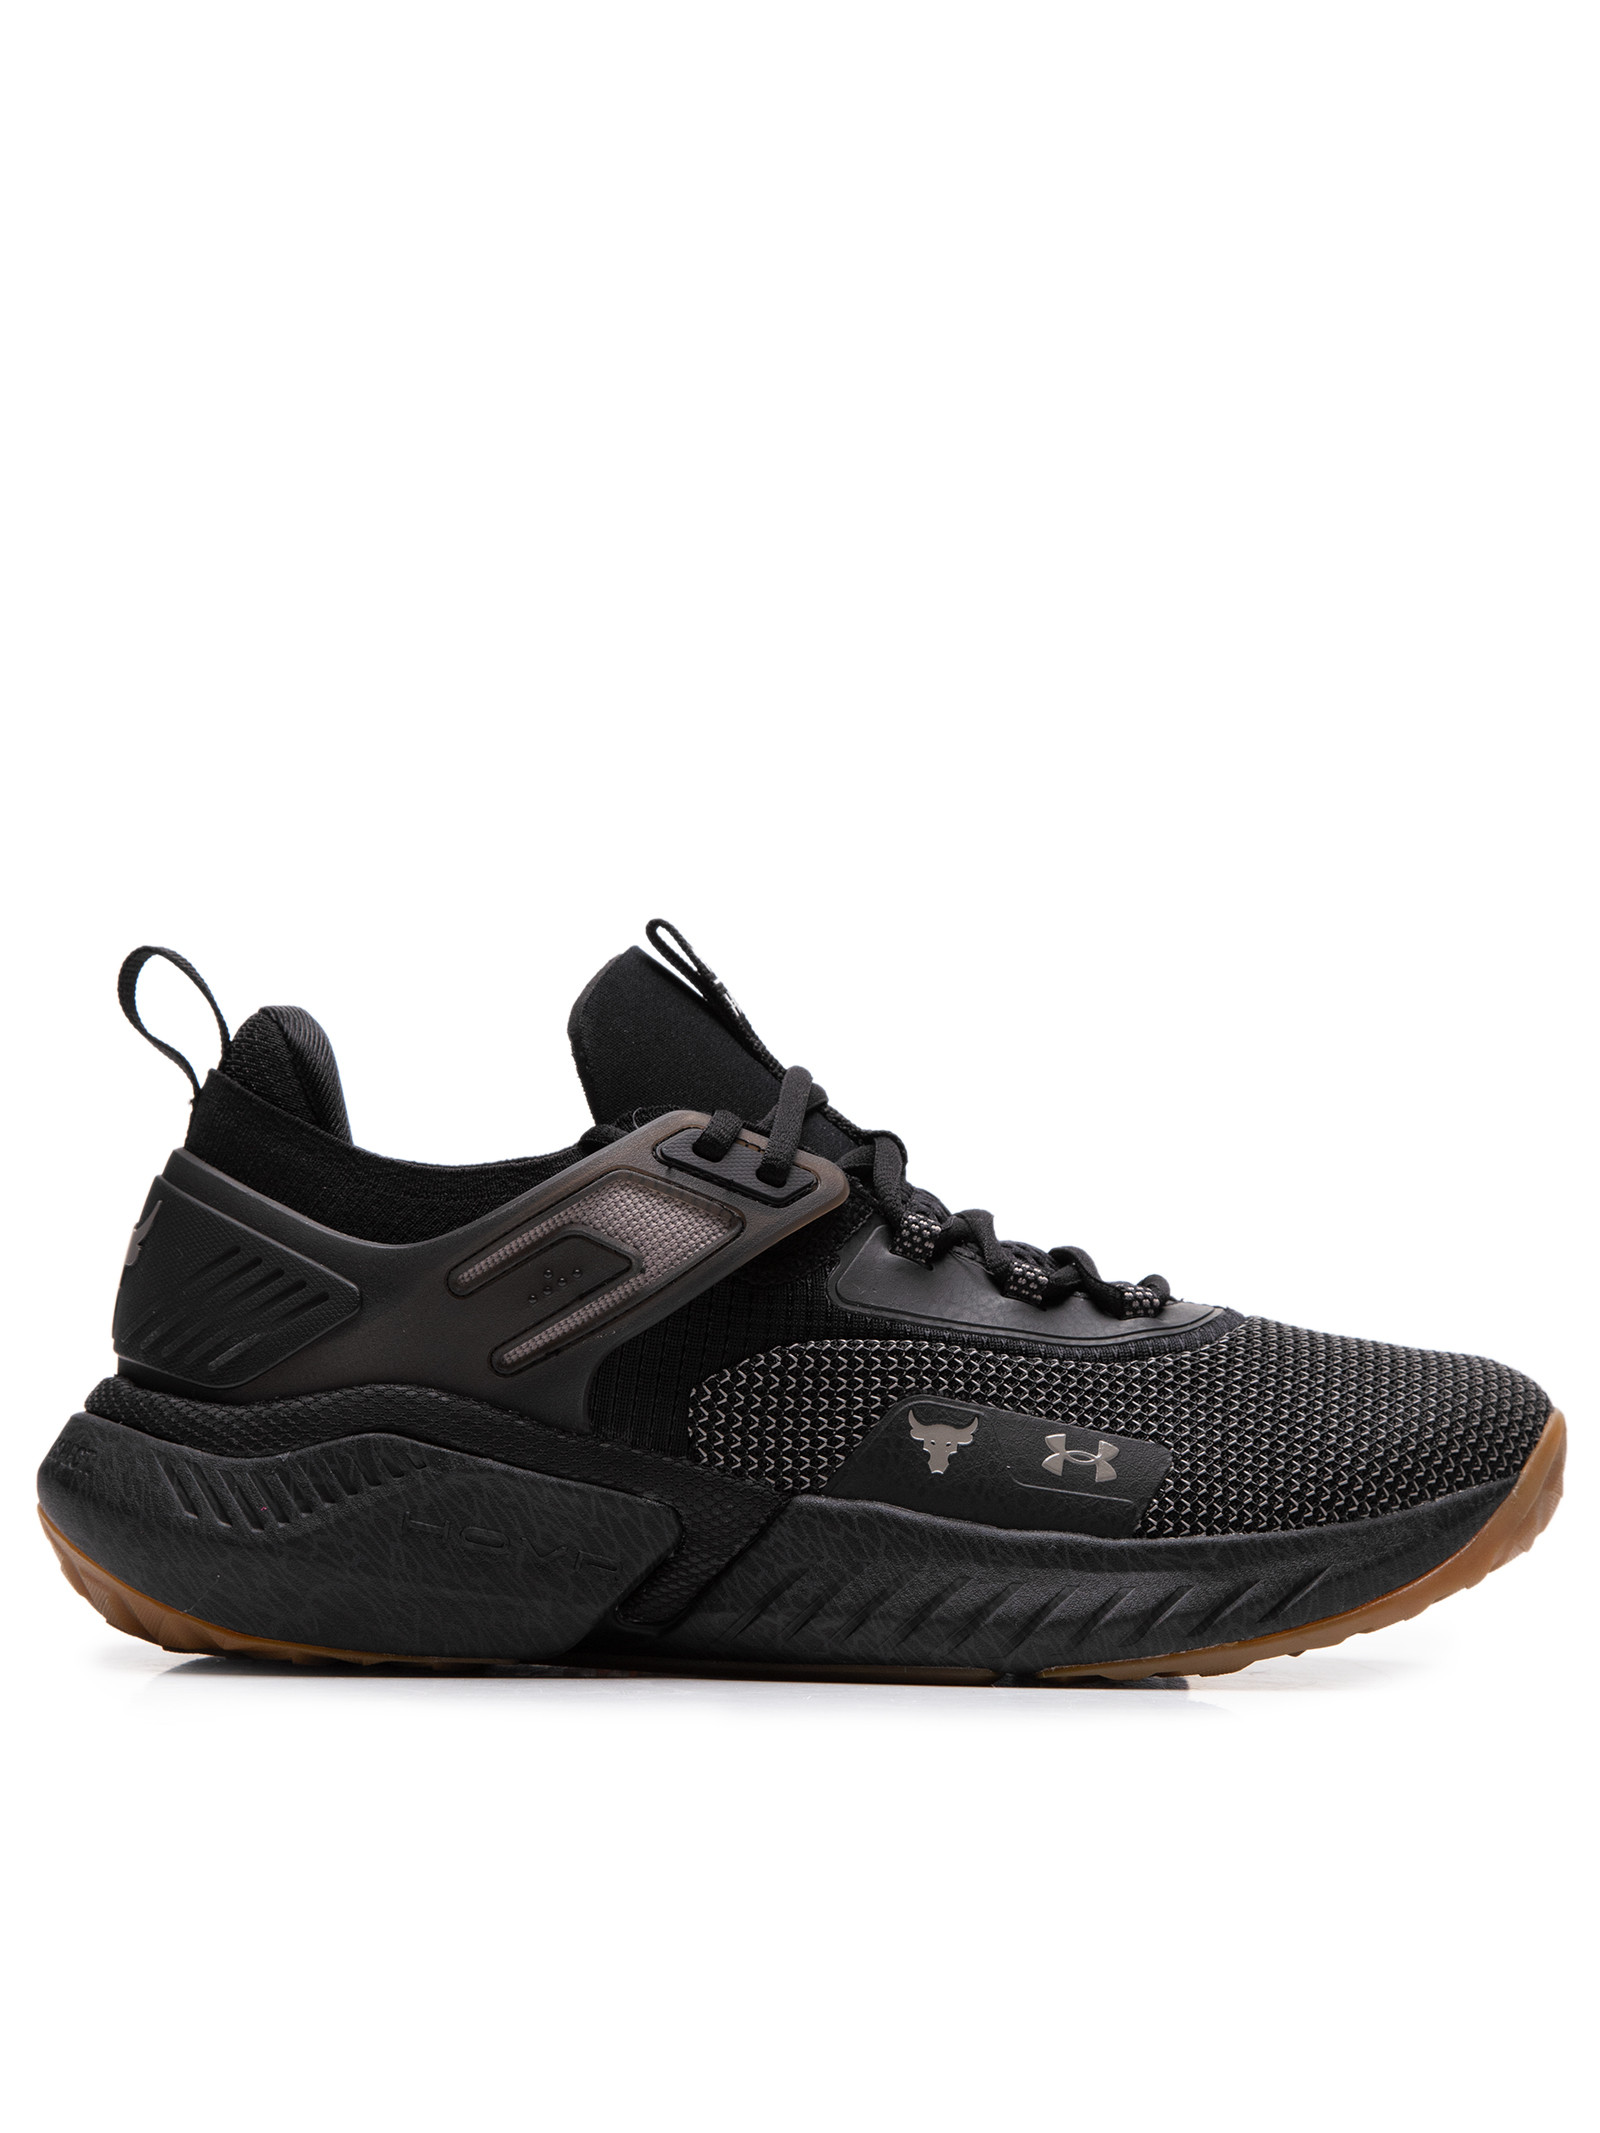 Tênis Masculino Project Rock 5 H - Under Armour - Preto - Shop2gether